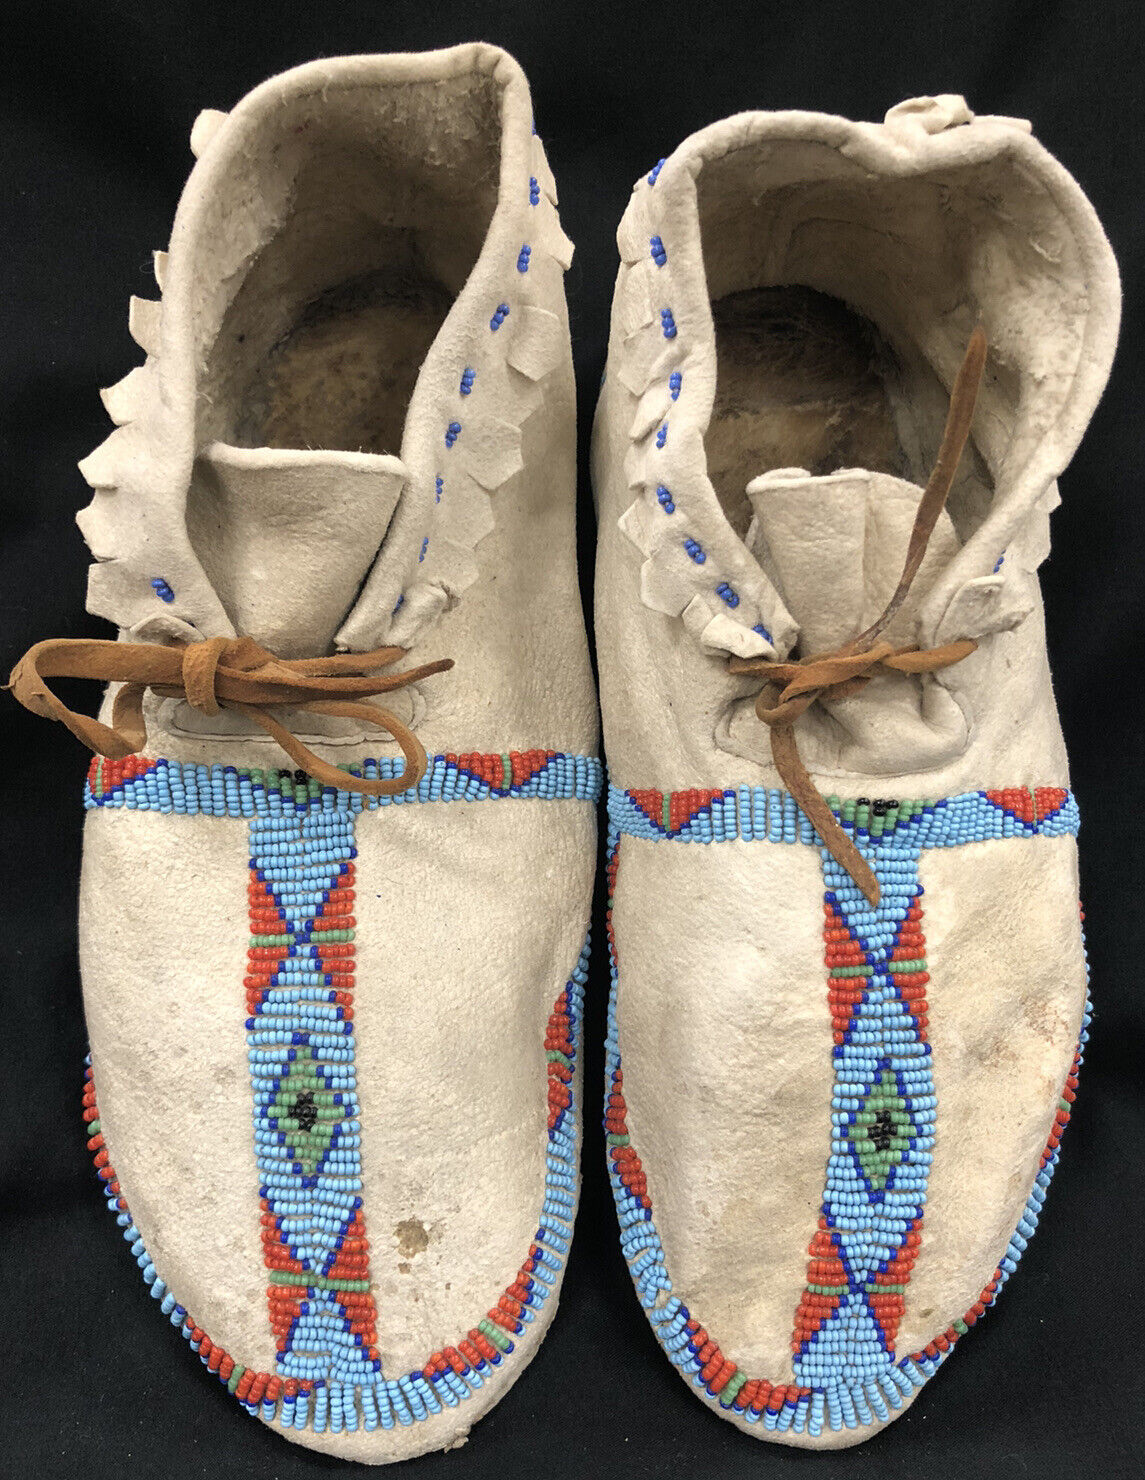 Antique Cheyenne Beaded Moccasins Circa 1880’s Native American Indian